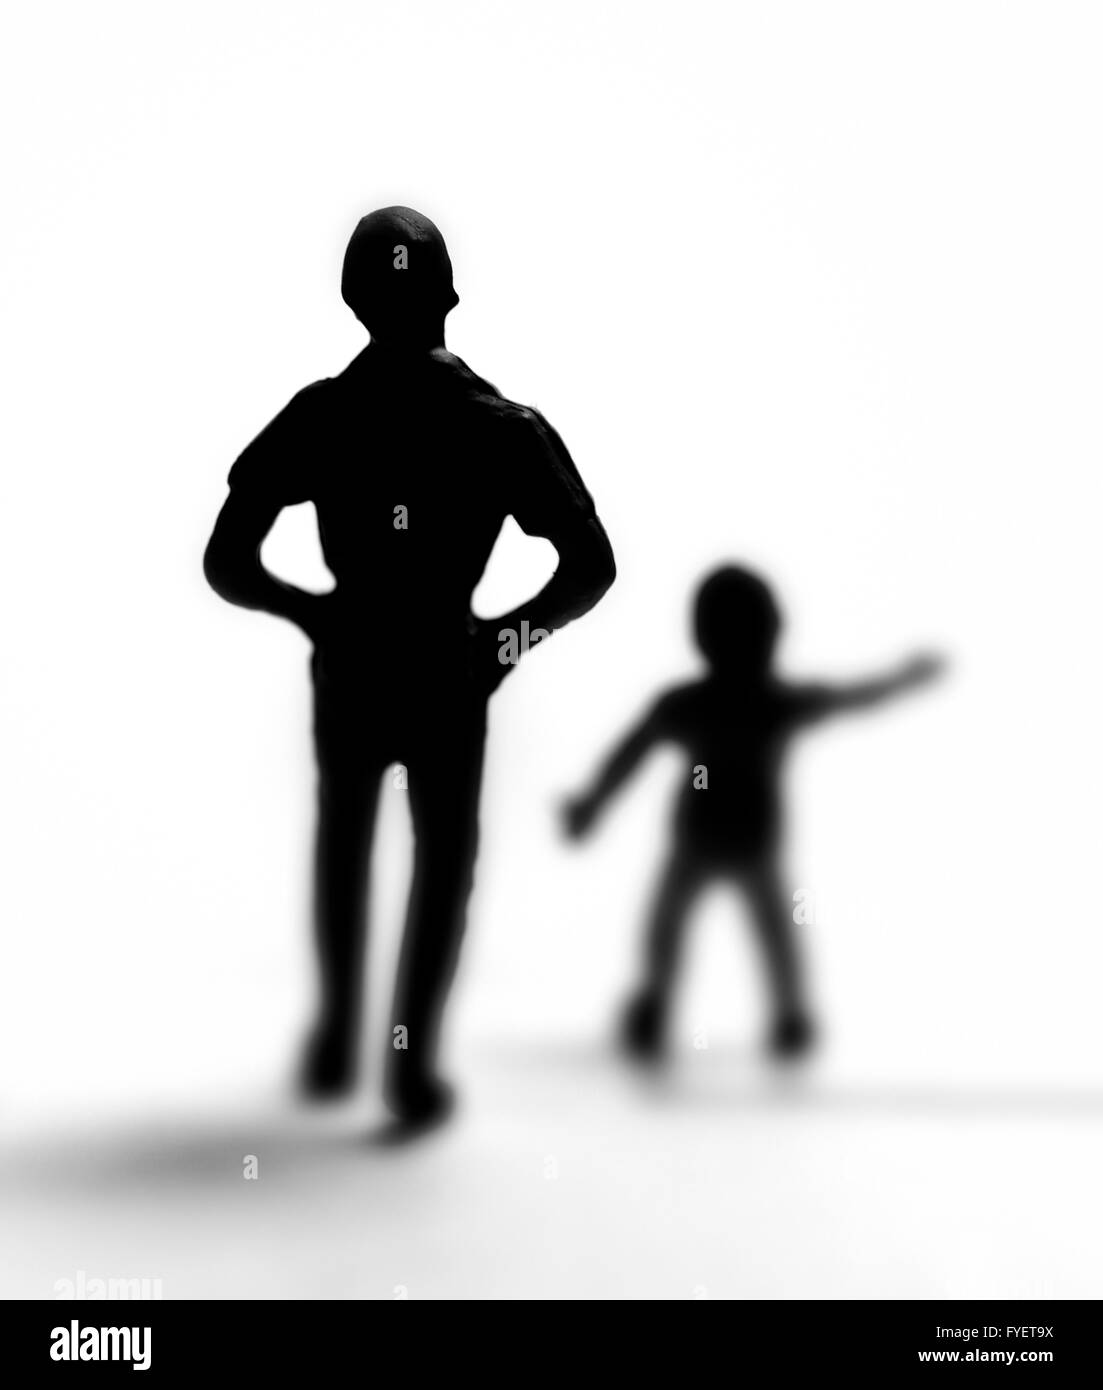 infant silhouette